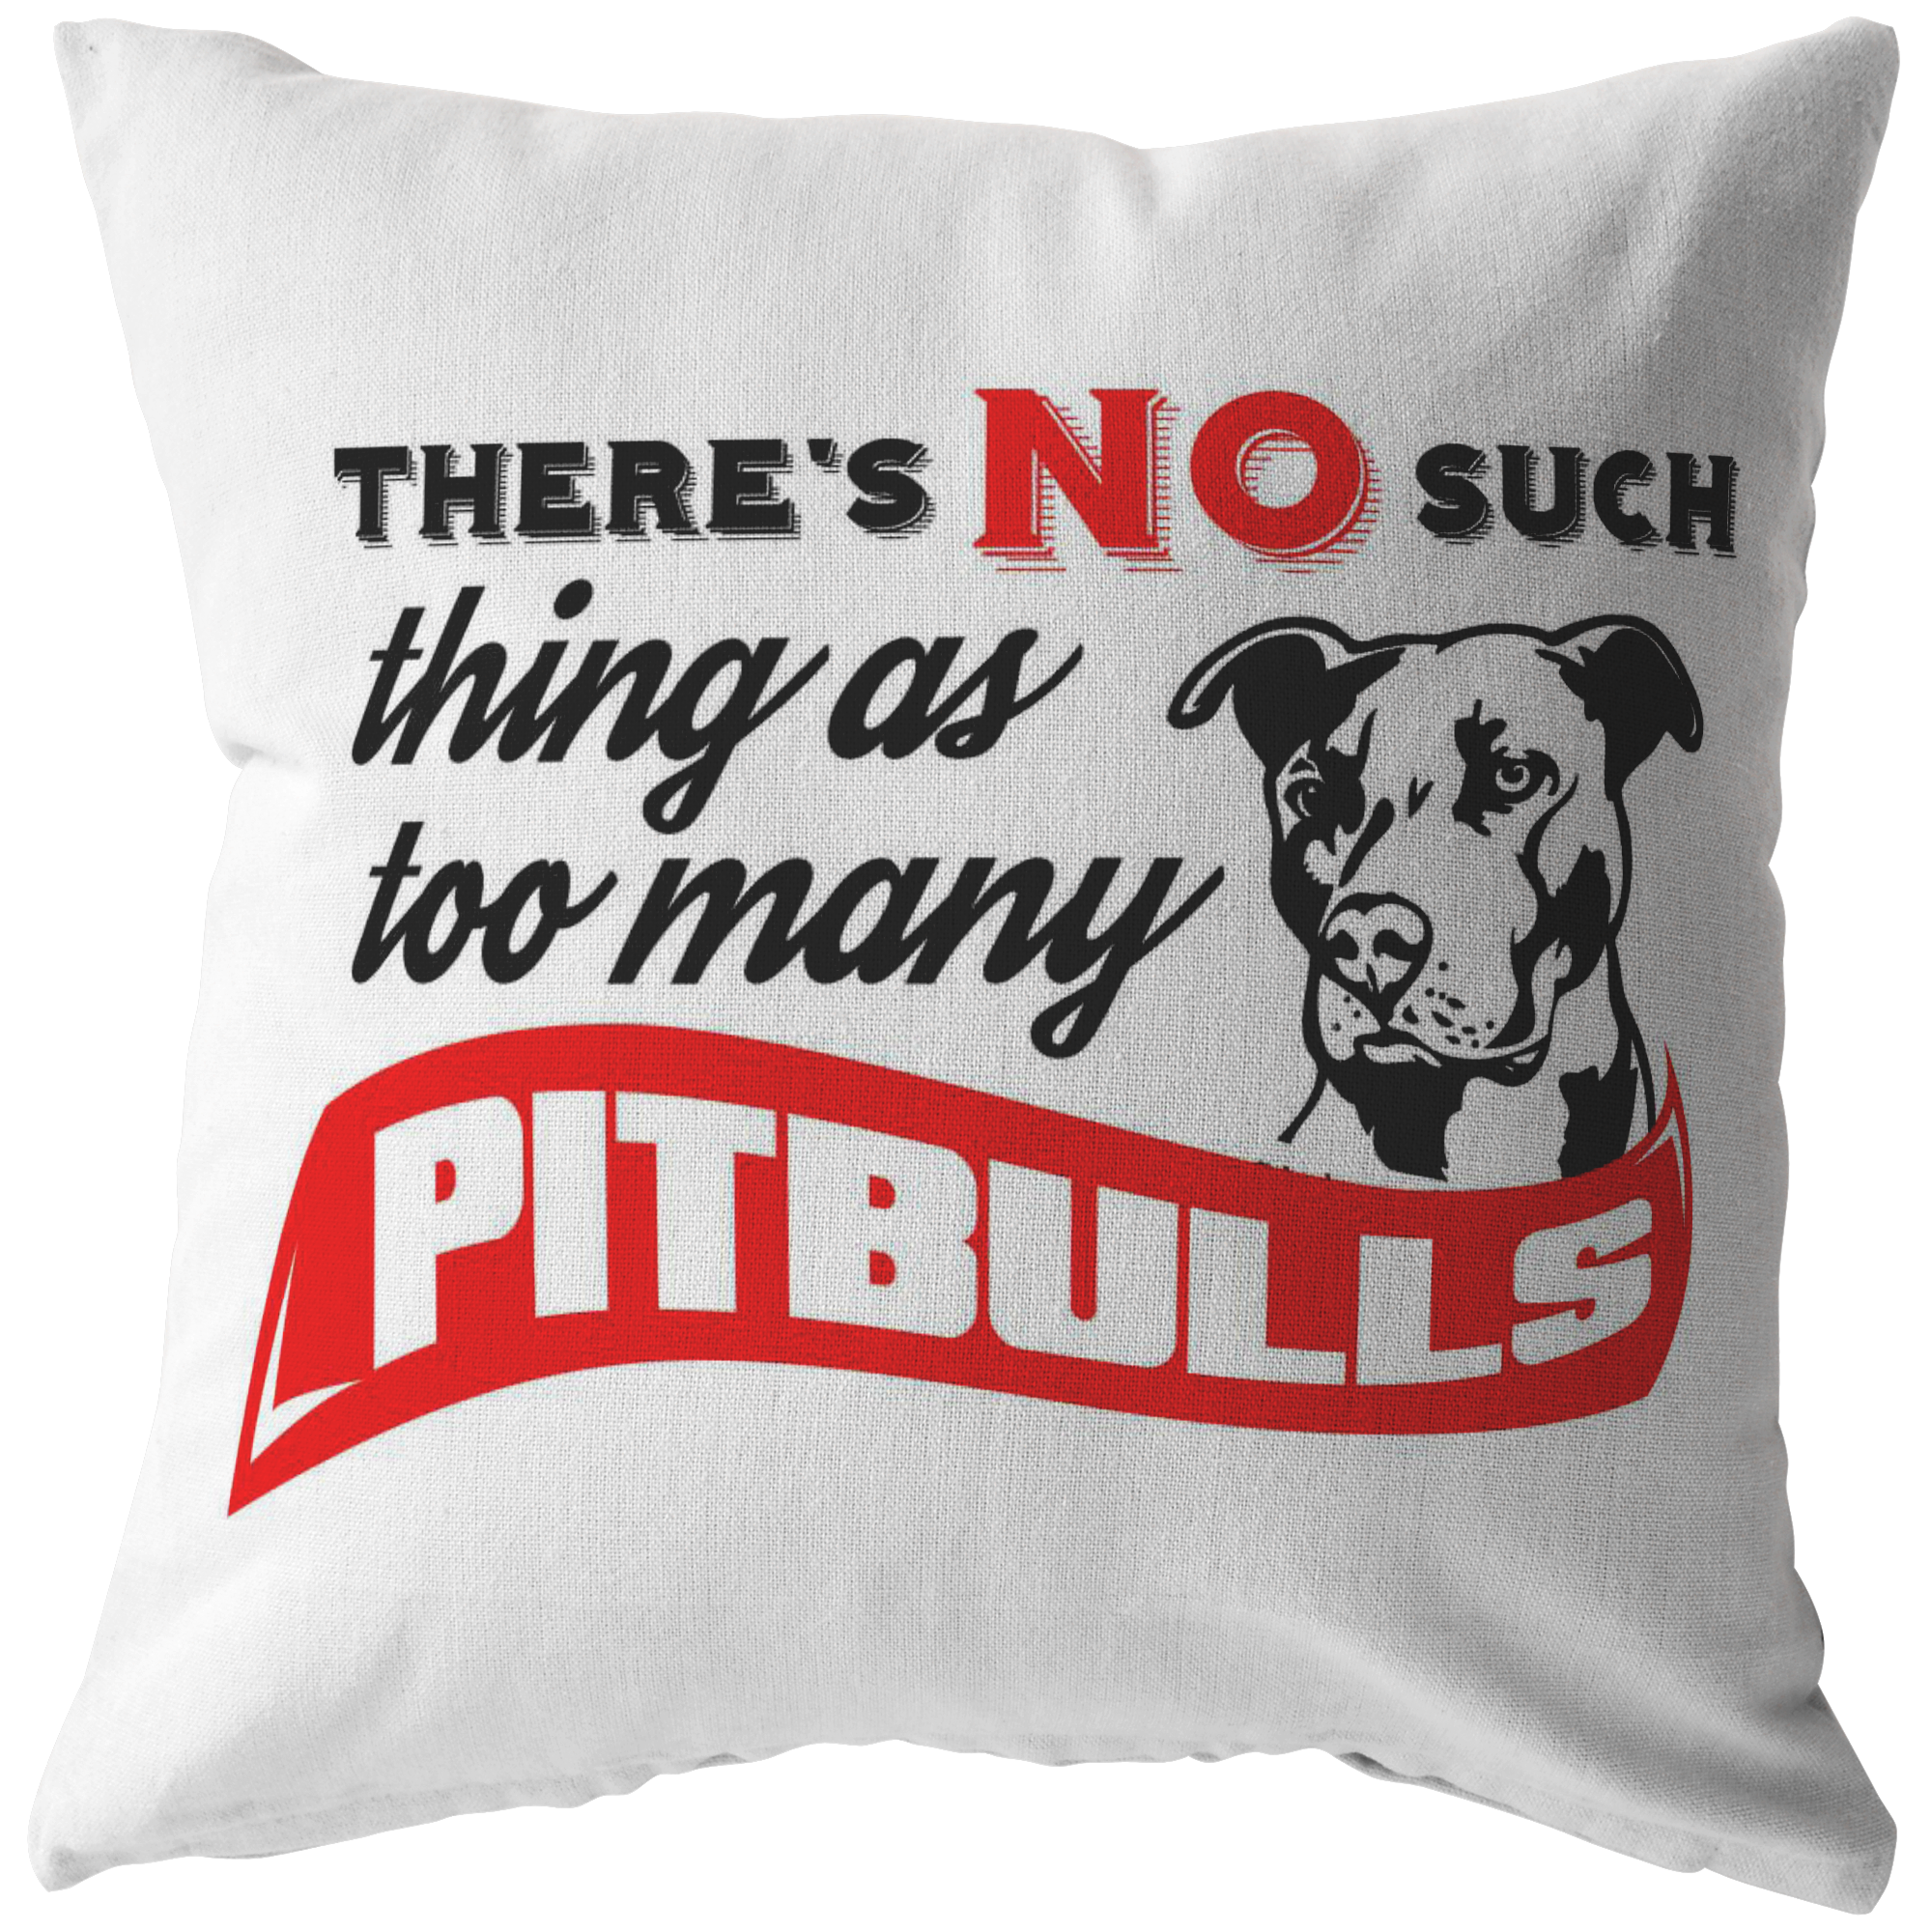 There's No such thing as too many Pitbull - Pillows